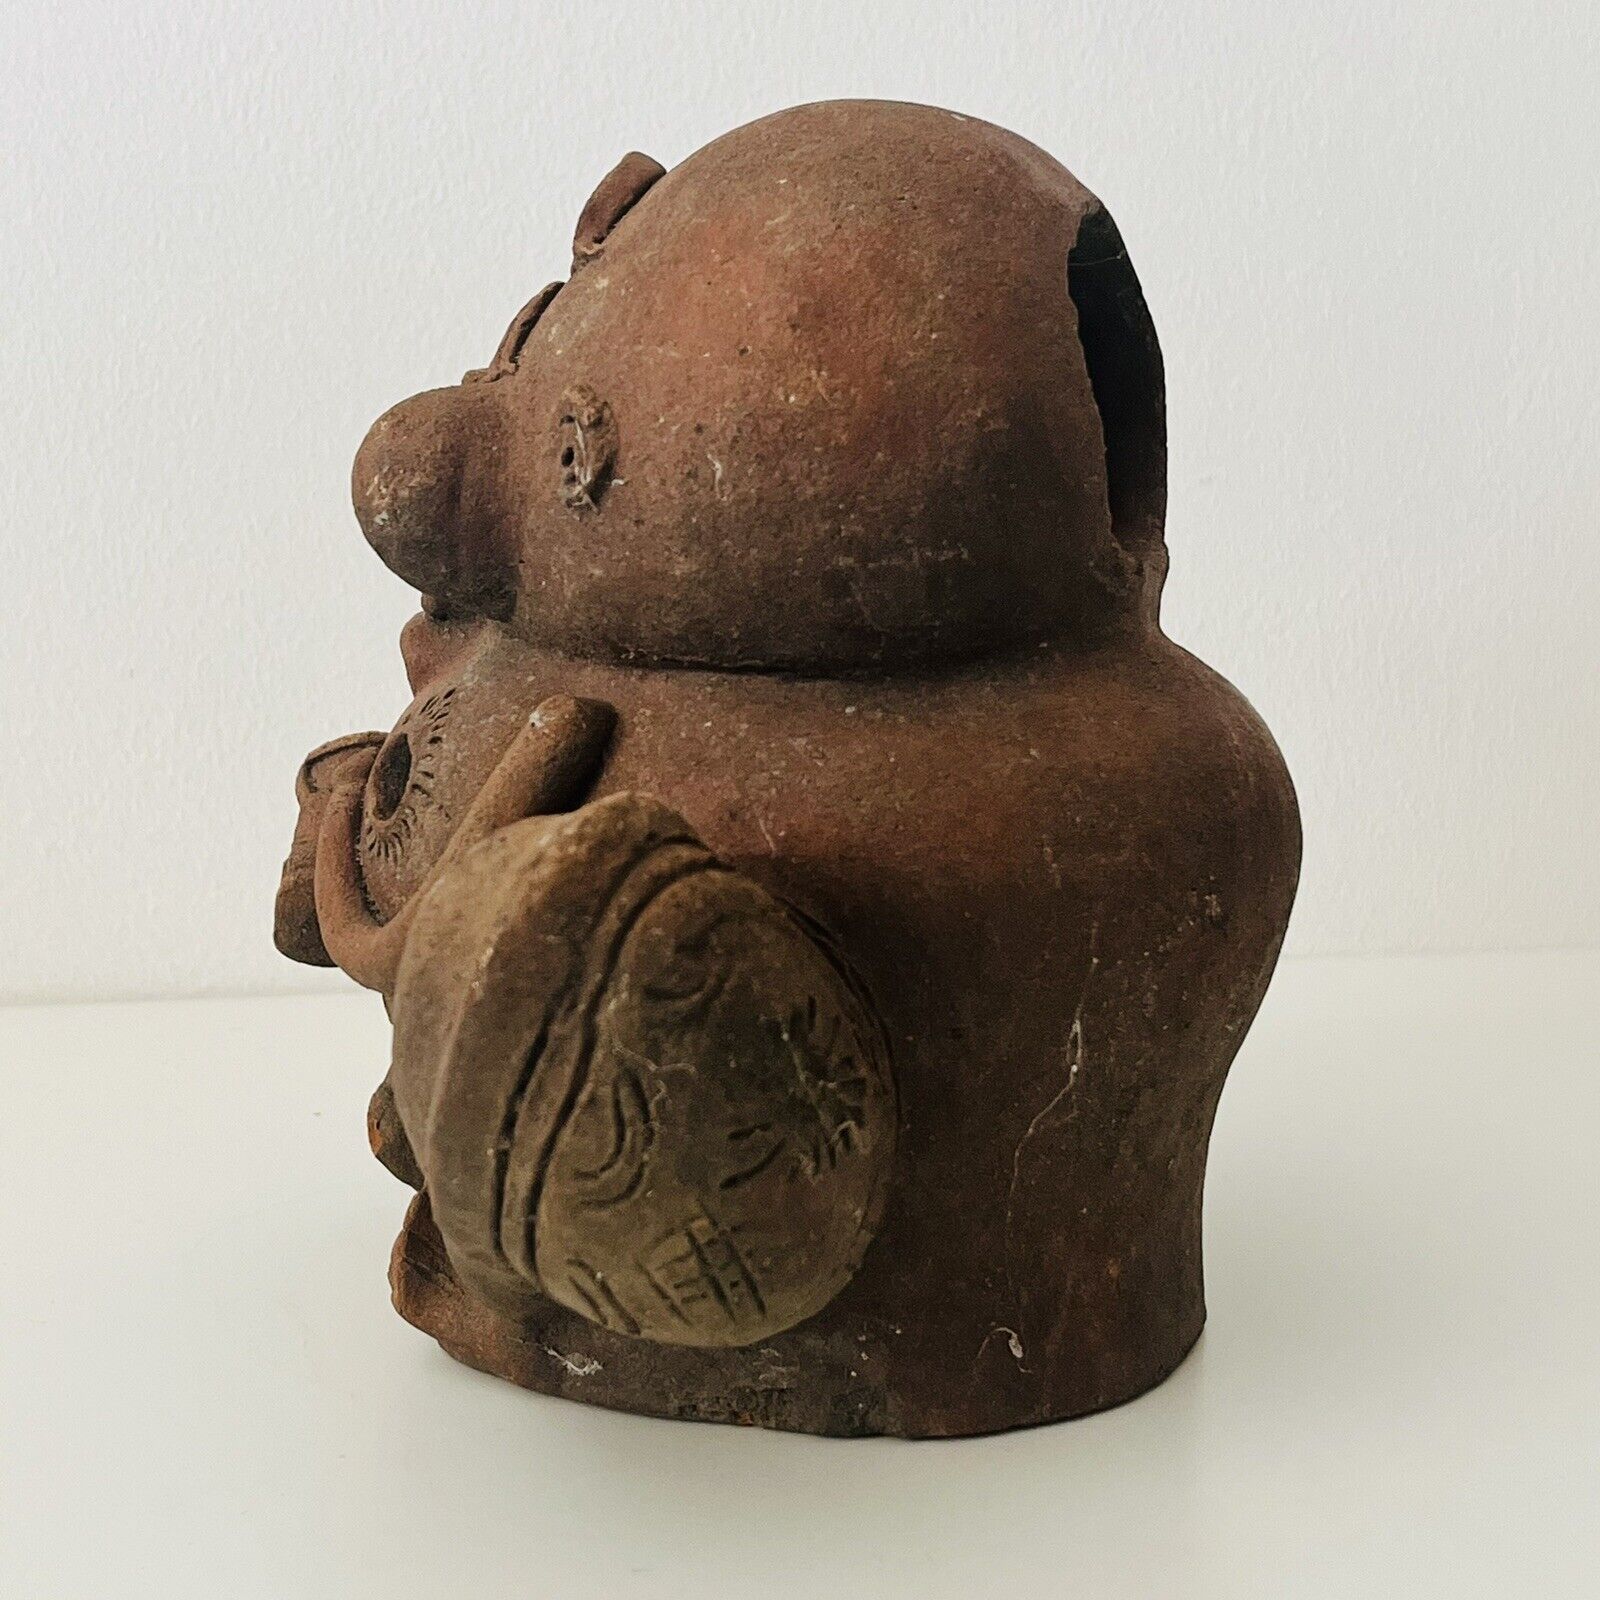 An Unusual Vintage Terracotta Candle Holder Or Figurine of A Laughing Buddha - Image 5 of 8